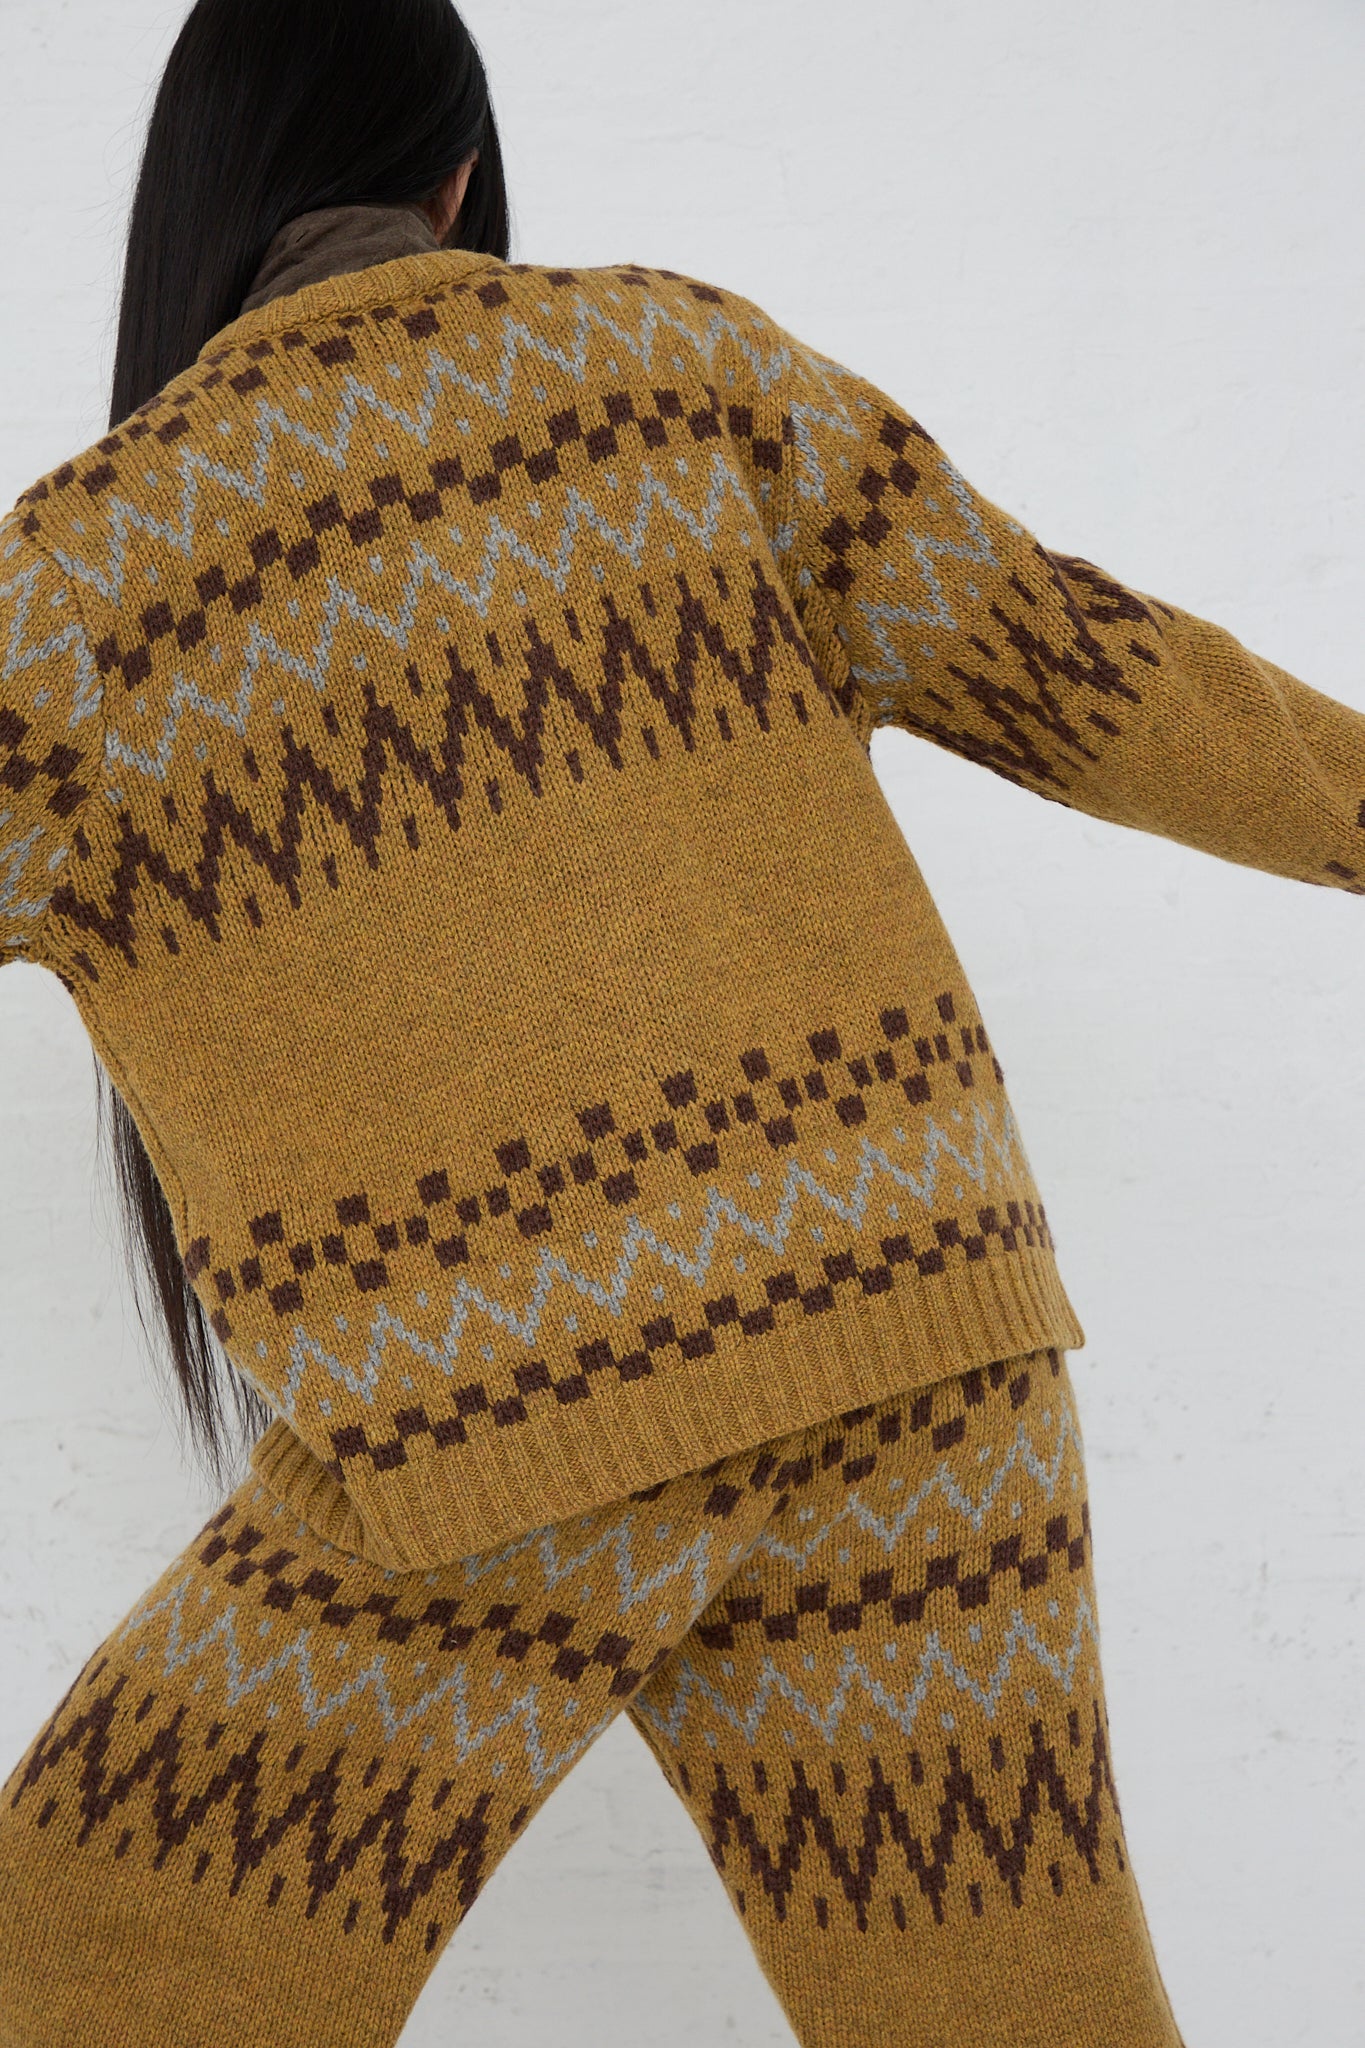 The back view of a woman wearing an Ichi Wool Knit Cardigan in Camel and pants.